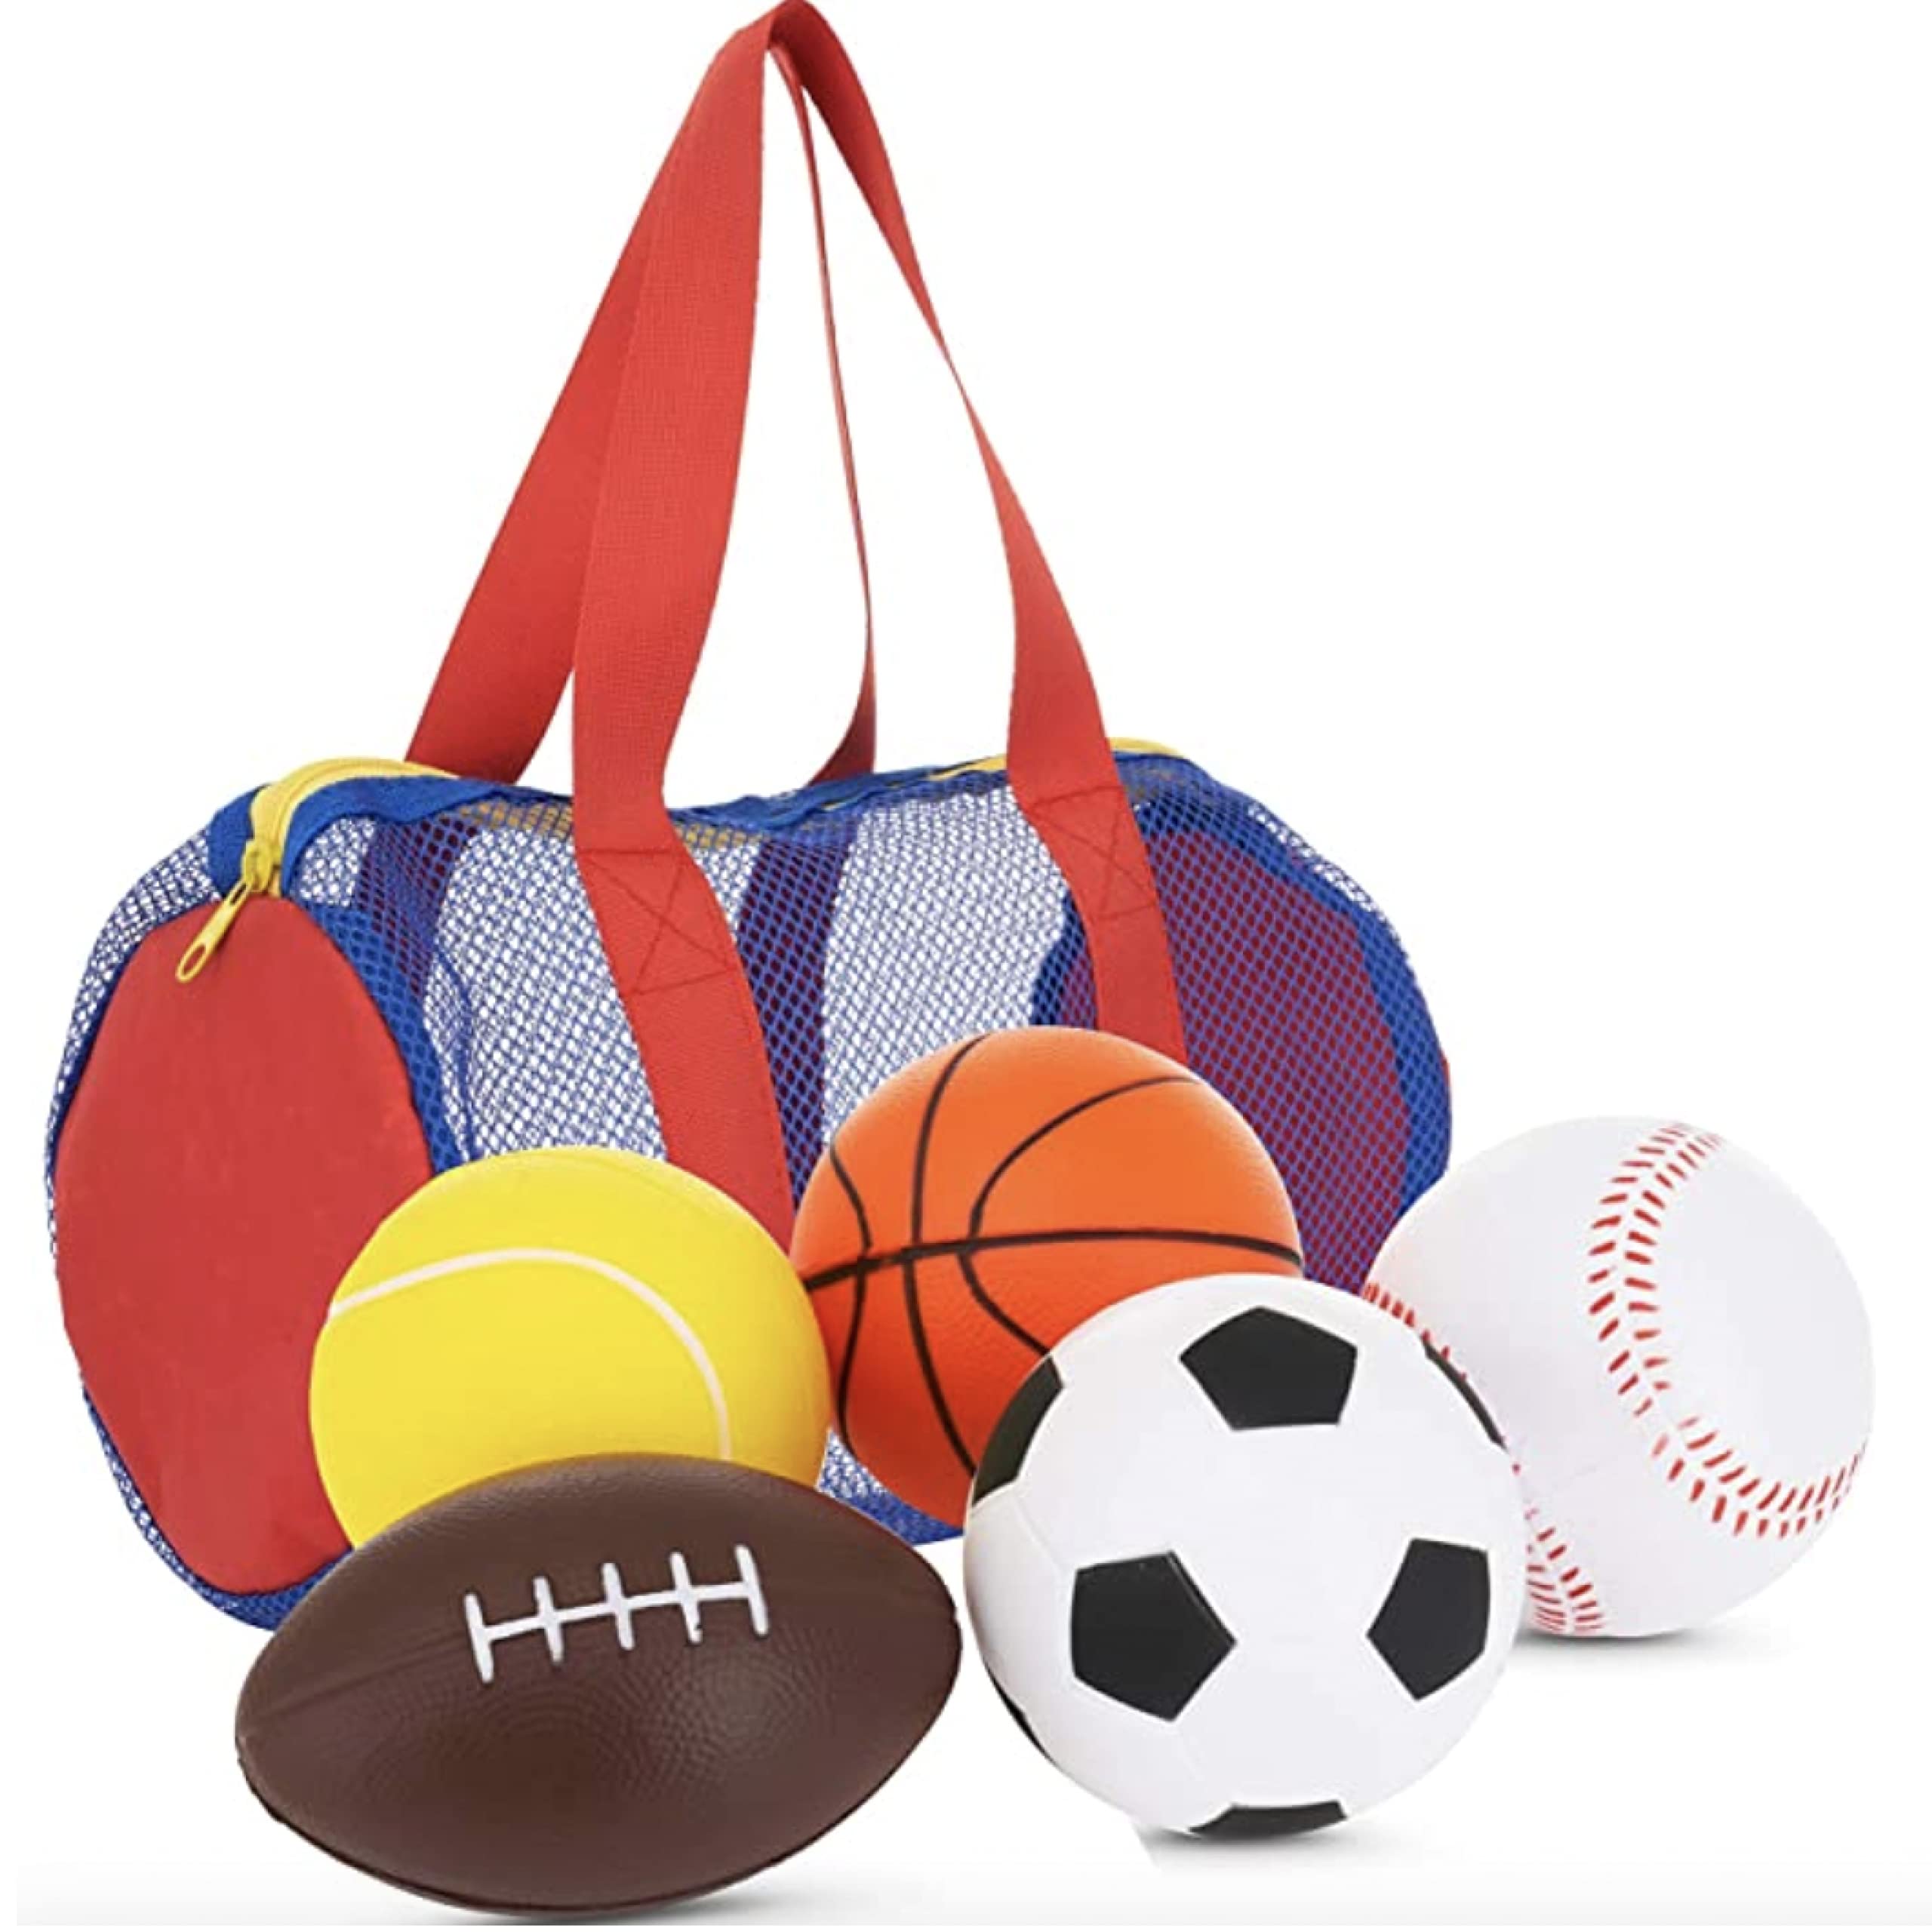 Foam Sports Soccer Balls Toys + FREE Bag - Set of 5 - Perfect for Small Hands to grab for Baby Kids, Toddler 1-3